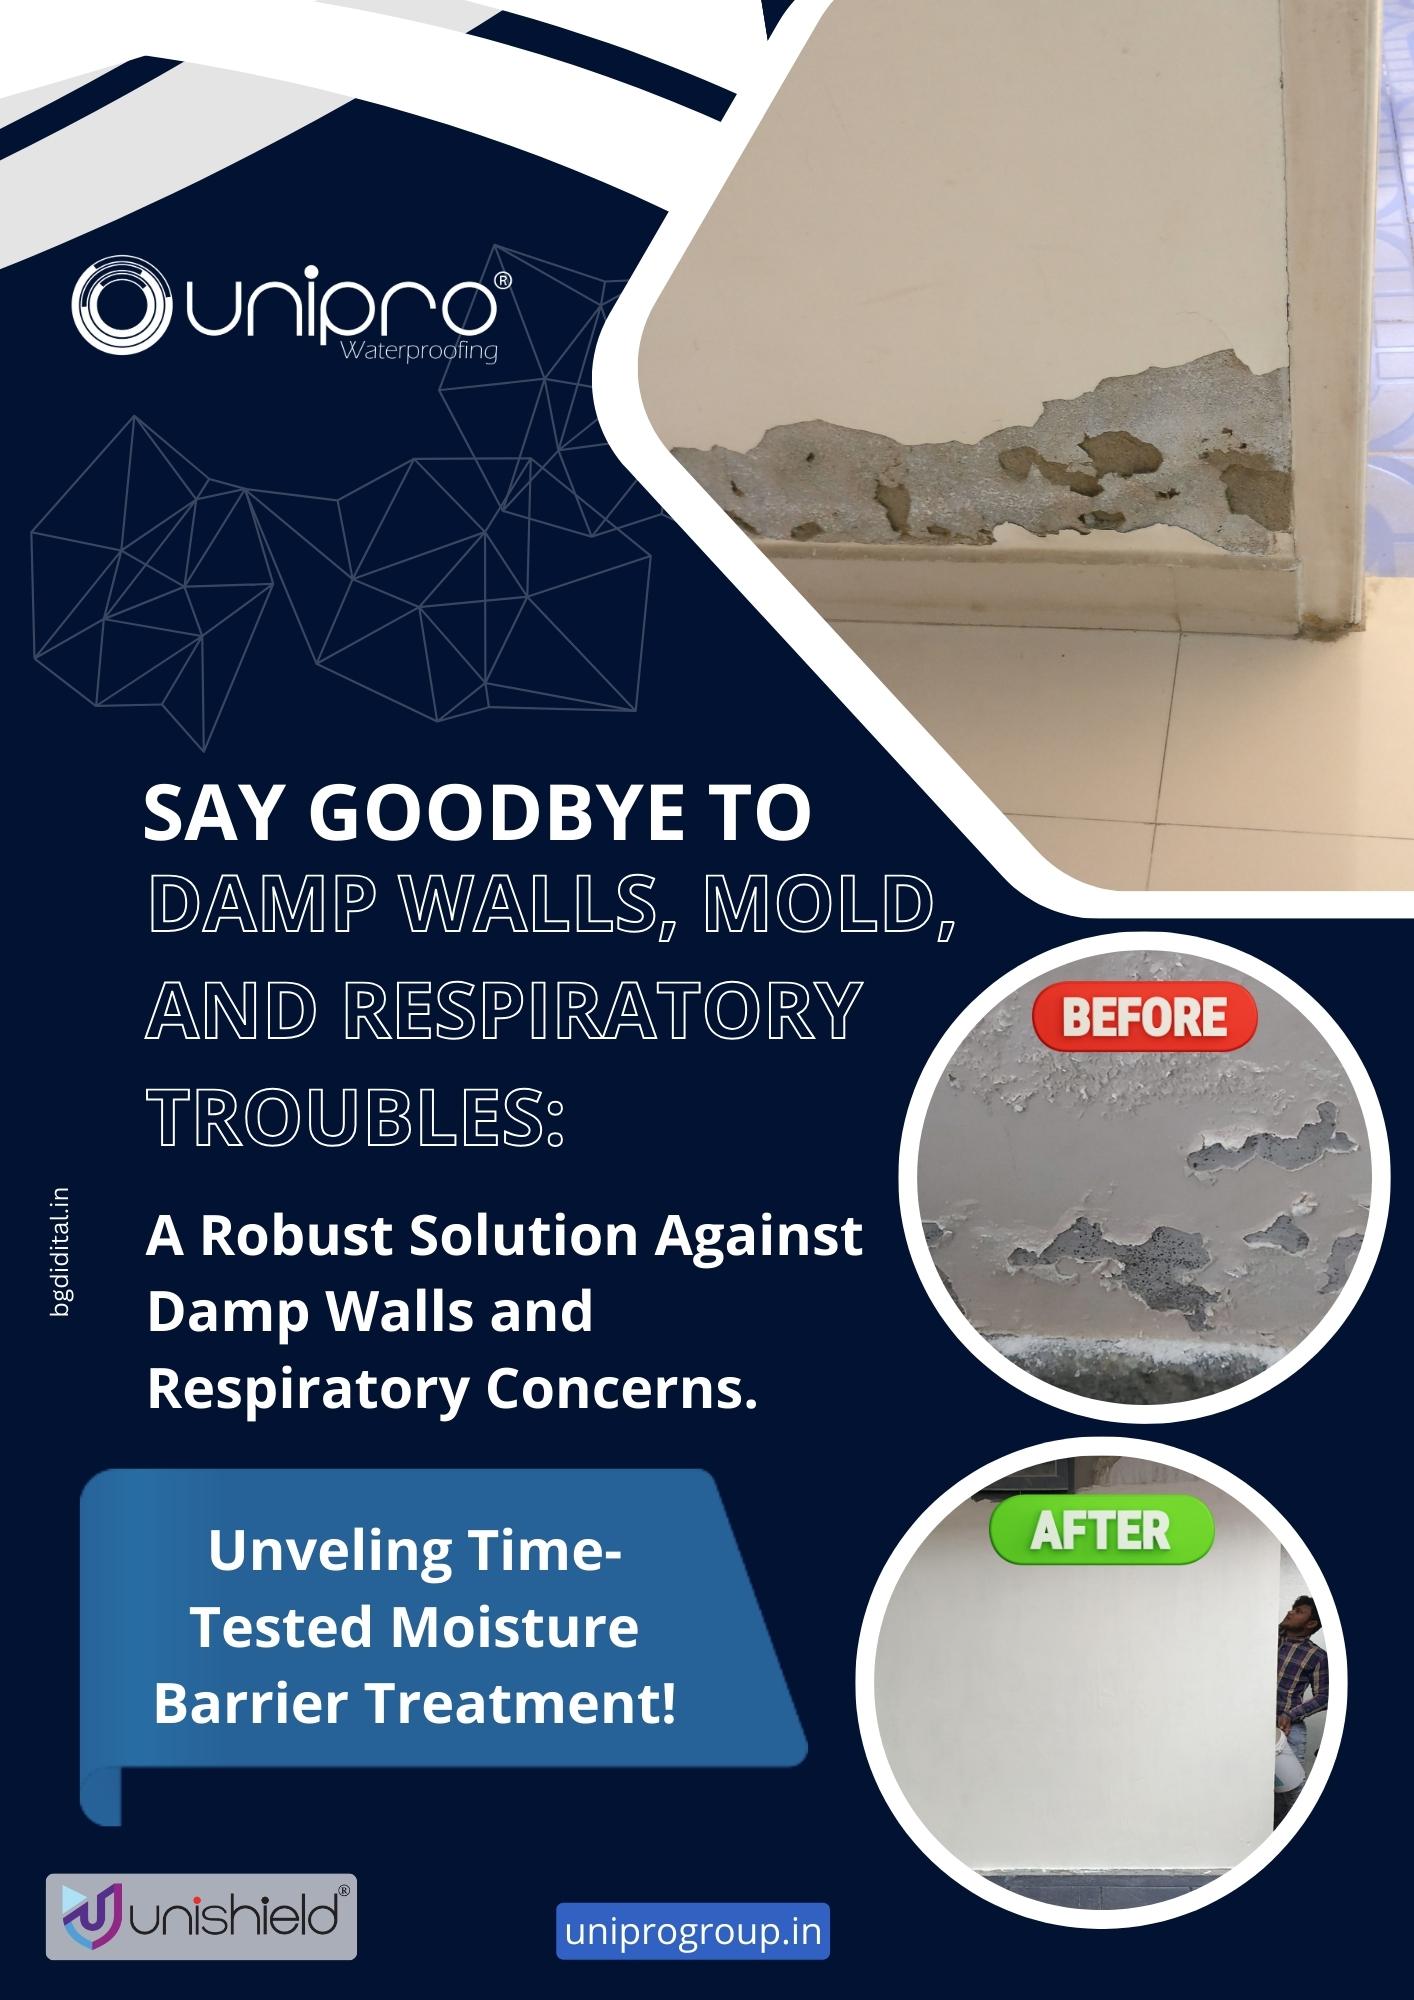 UniPro®Walls: Say Goodbye to Damp Walls, Mold, and Respiratory Troubles